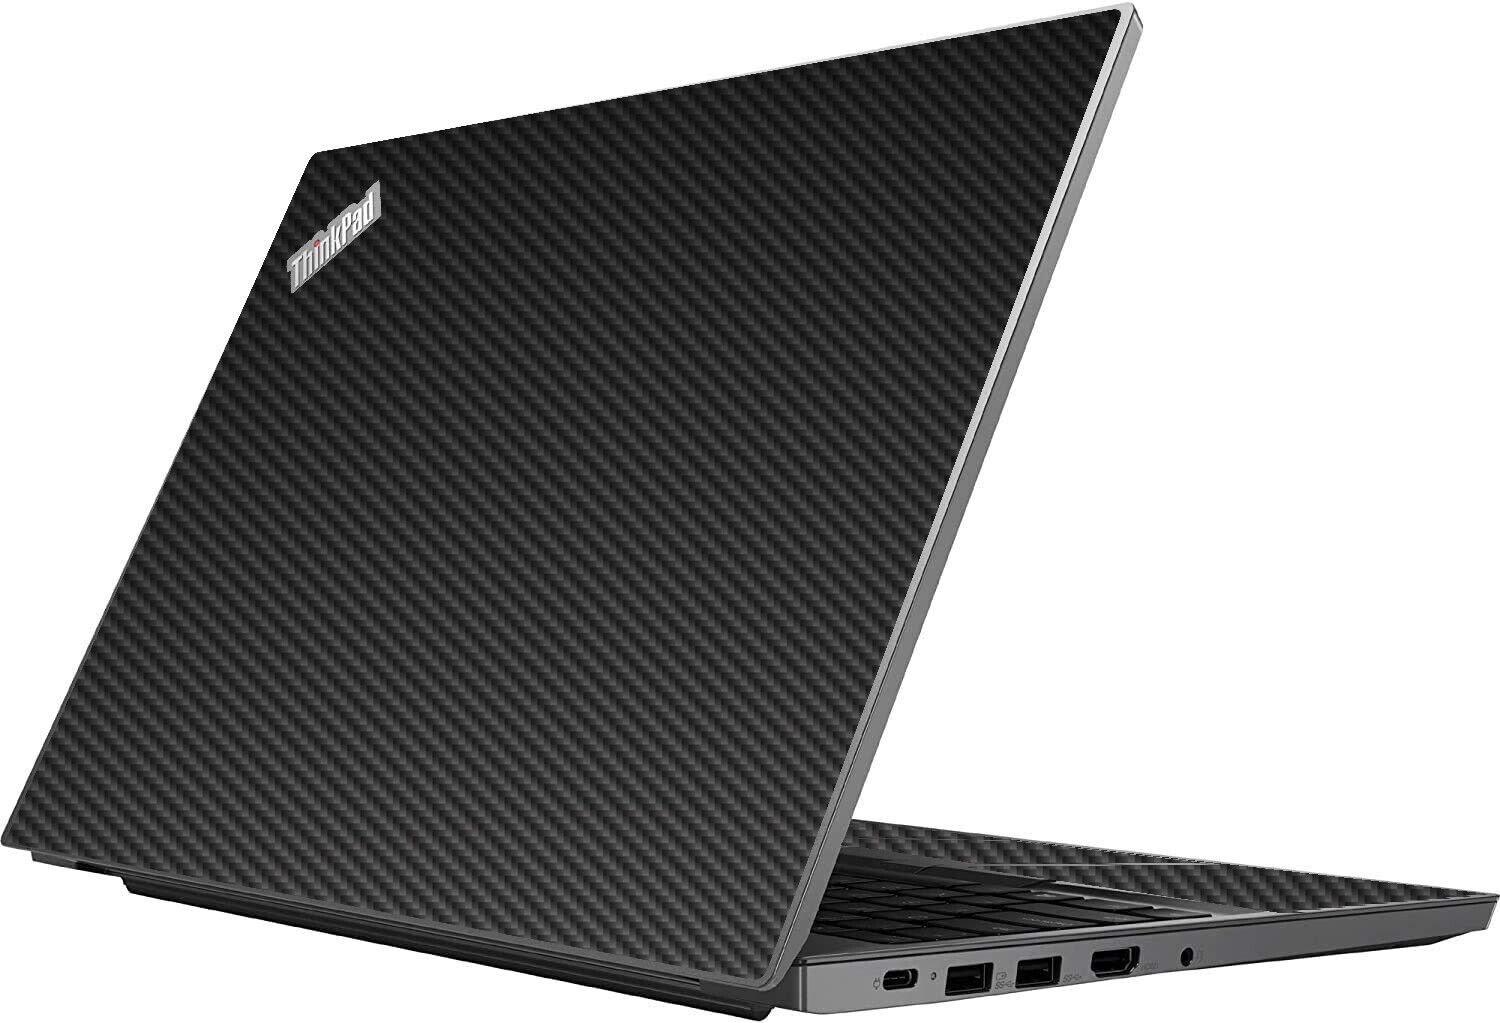 LidStyles Carbon Fiber Laptop Skin Protector Decal Lenovo ThinkPad T14 G1 / G2